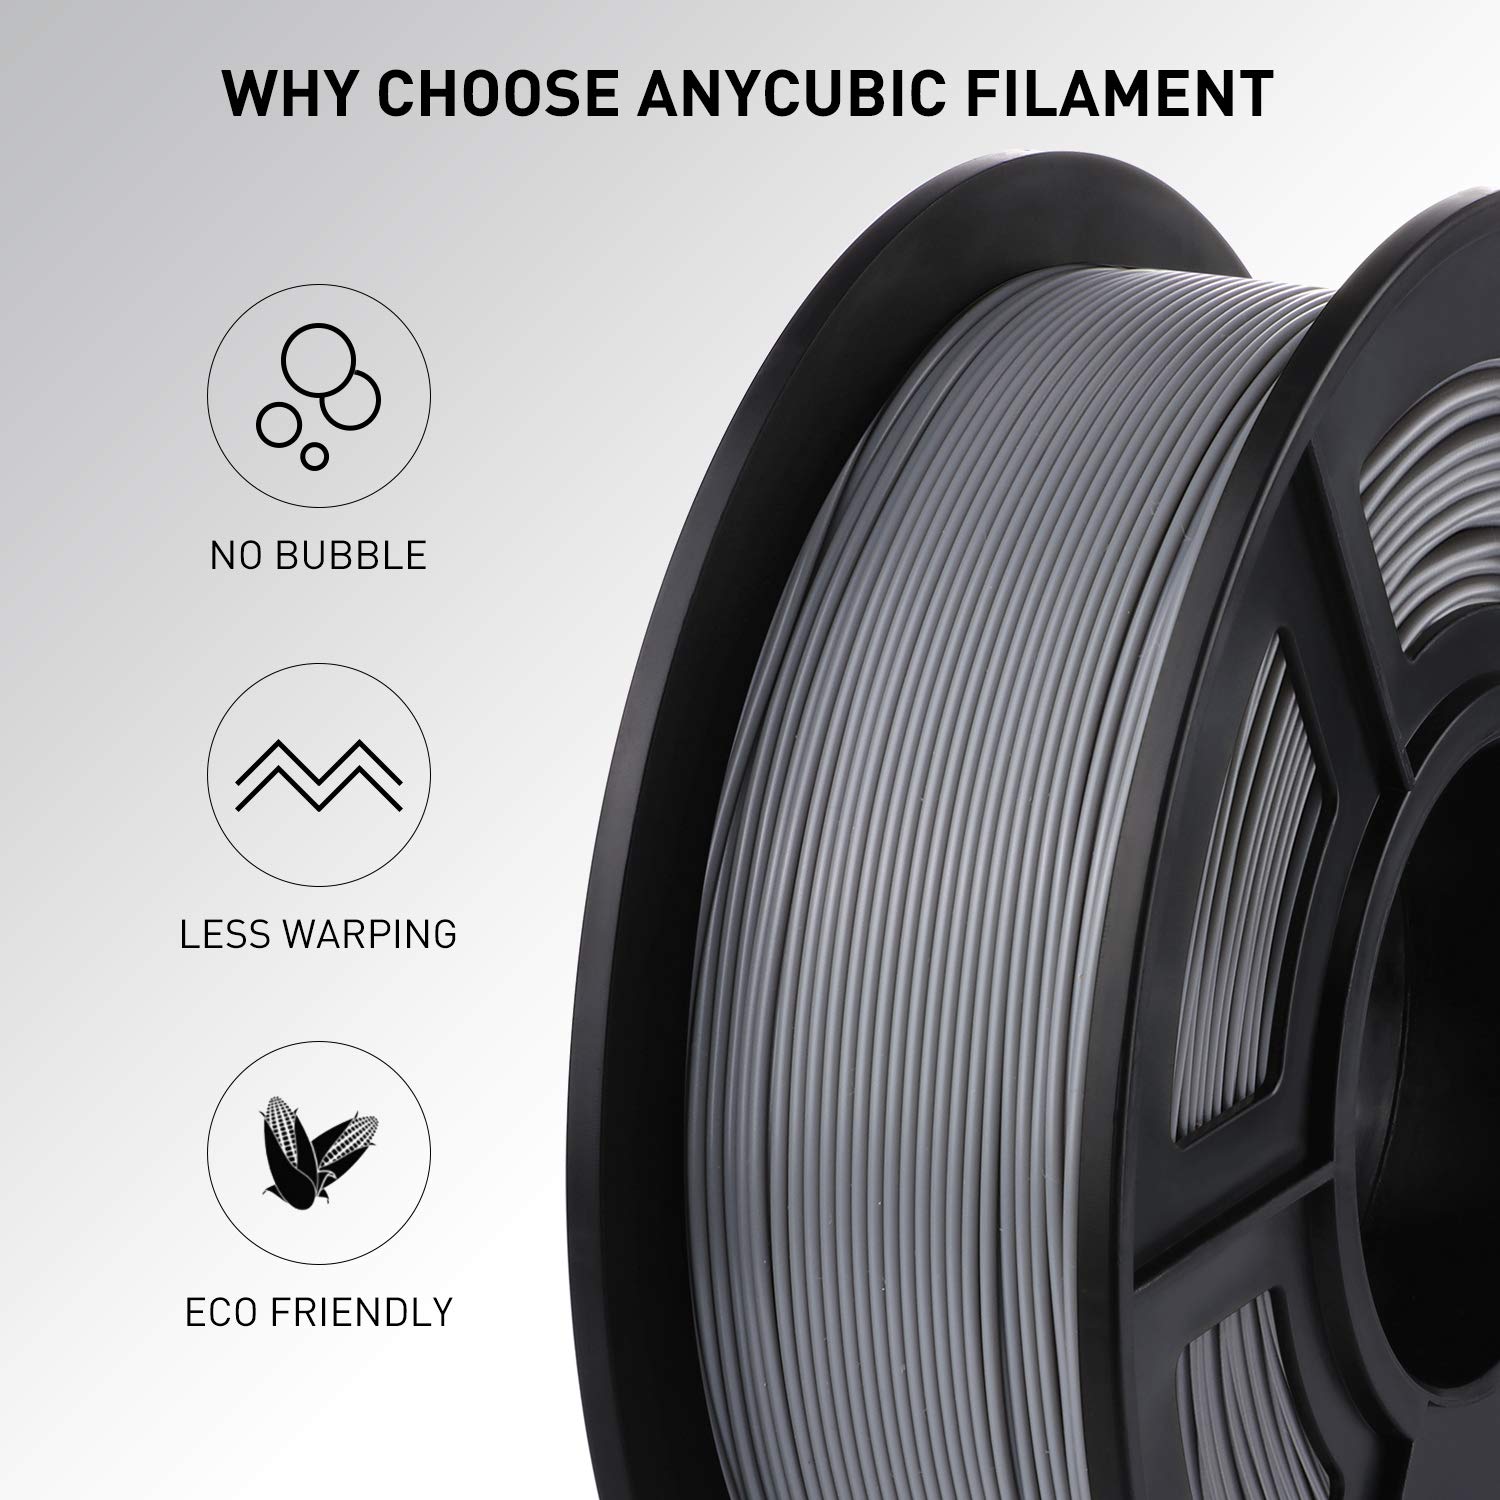 ANYCUBIC 3D Printer Filament,1.75mm Dimensional Accuracy Black / 0.02 mm PLA Filament for Most 3D Printers